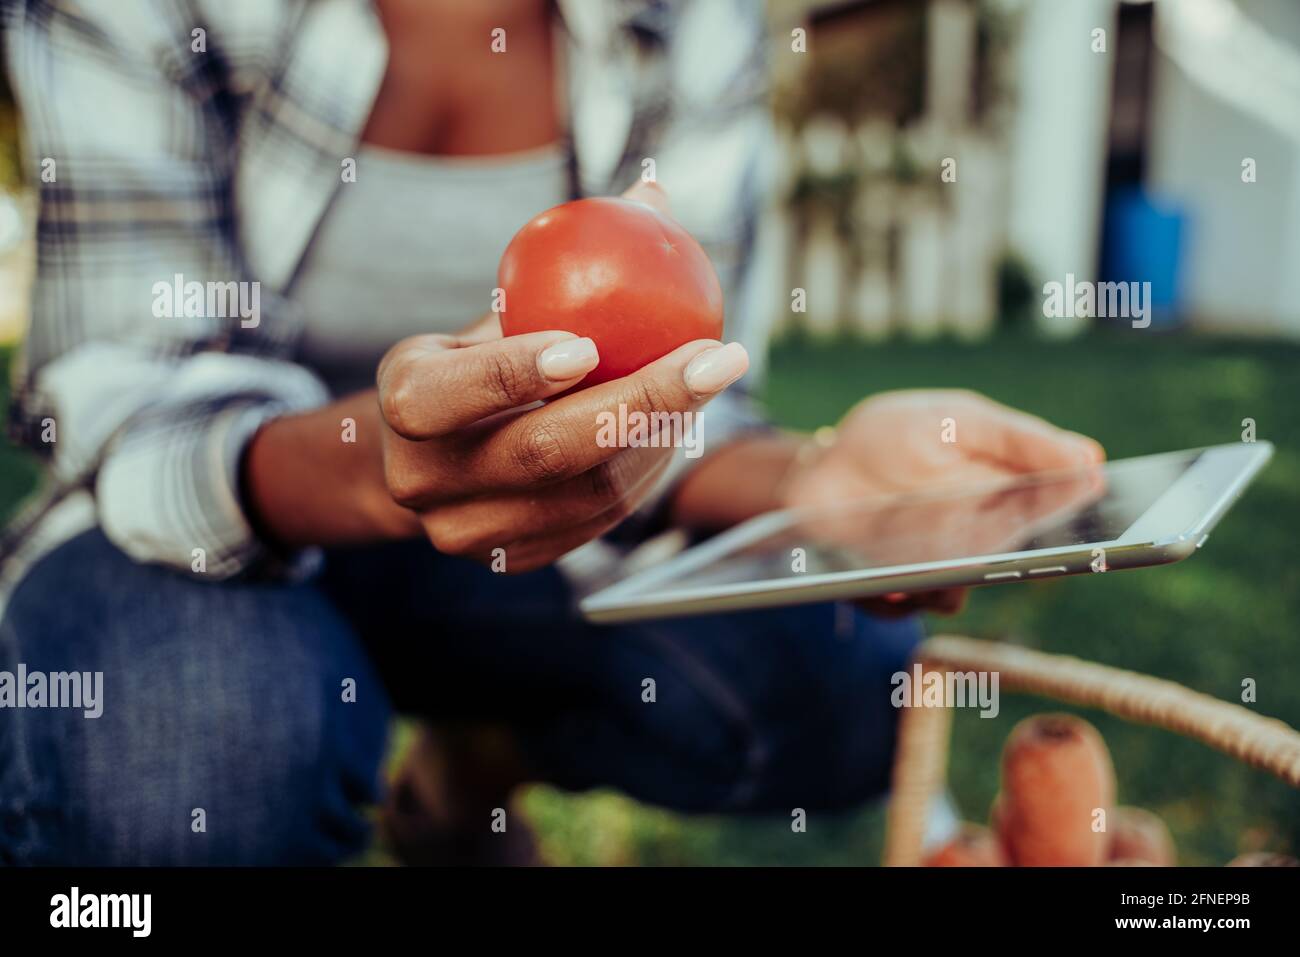 Mixed race female holding fresh tomato close up researching nutrition information of digital tablet  Stock Photo